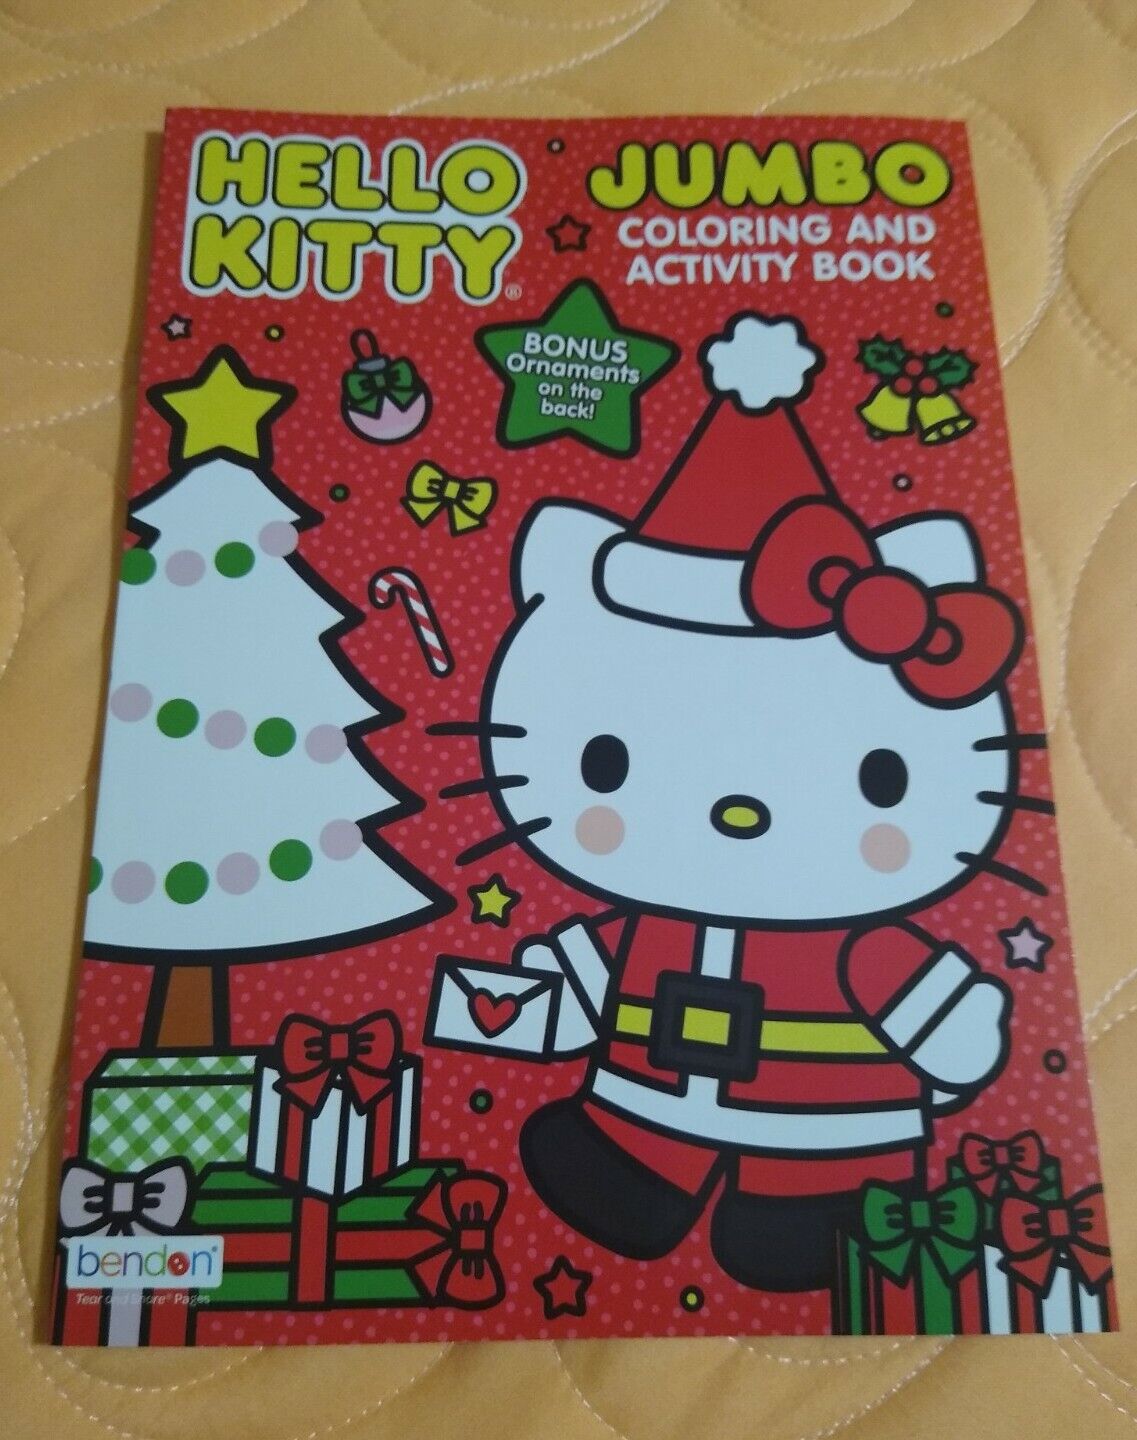 Hello kitty ðchristmasð coloring activity book tearshare pages new ð ship